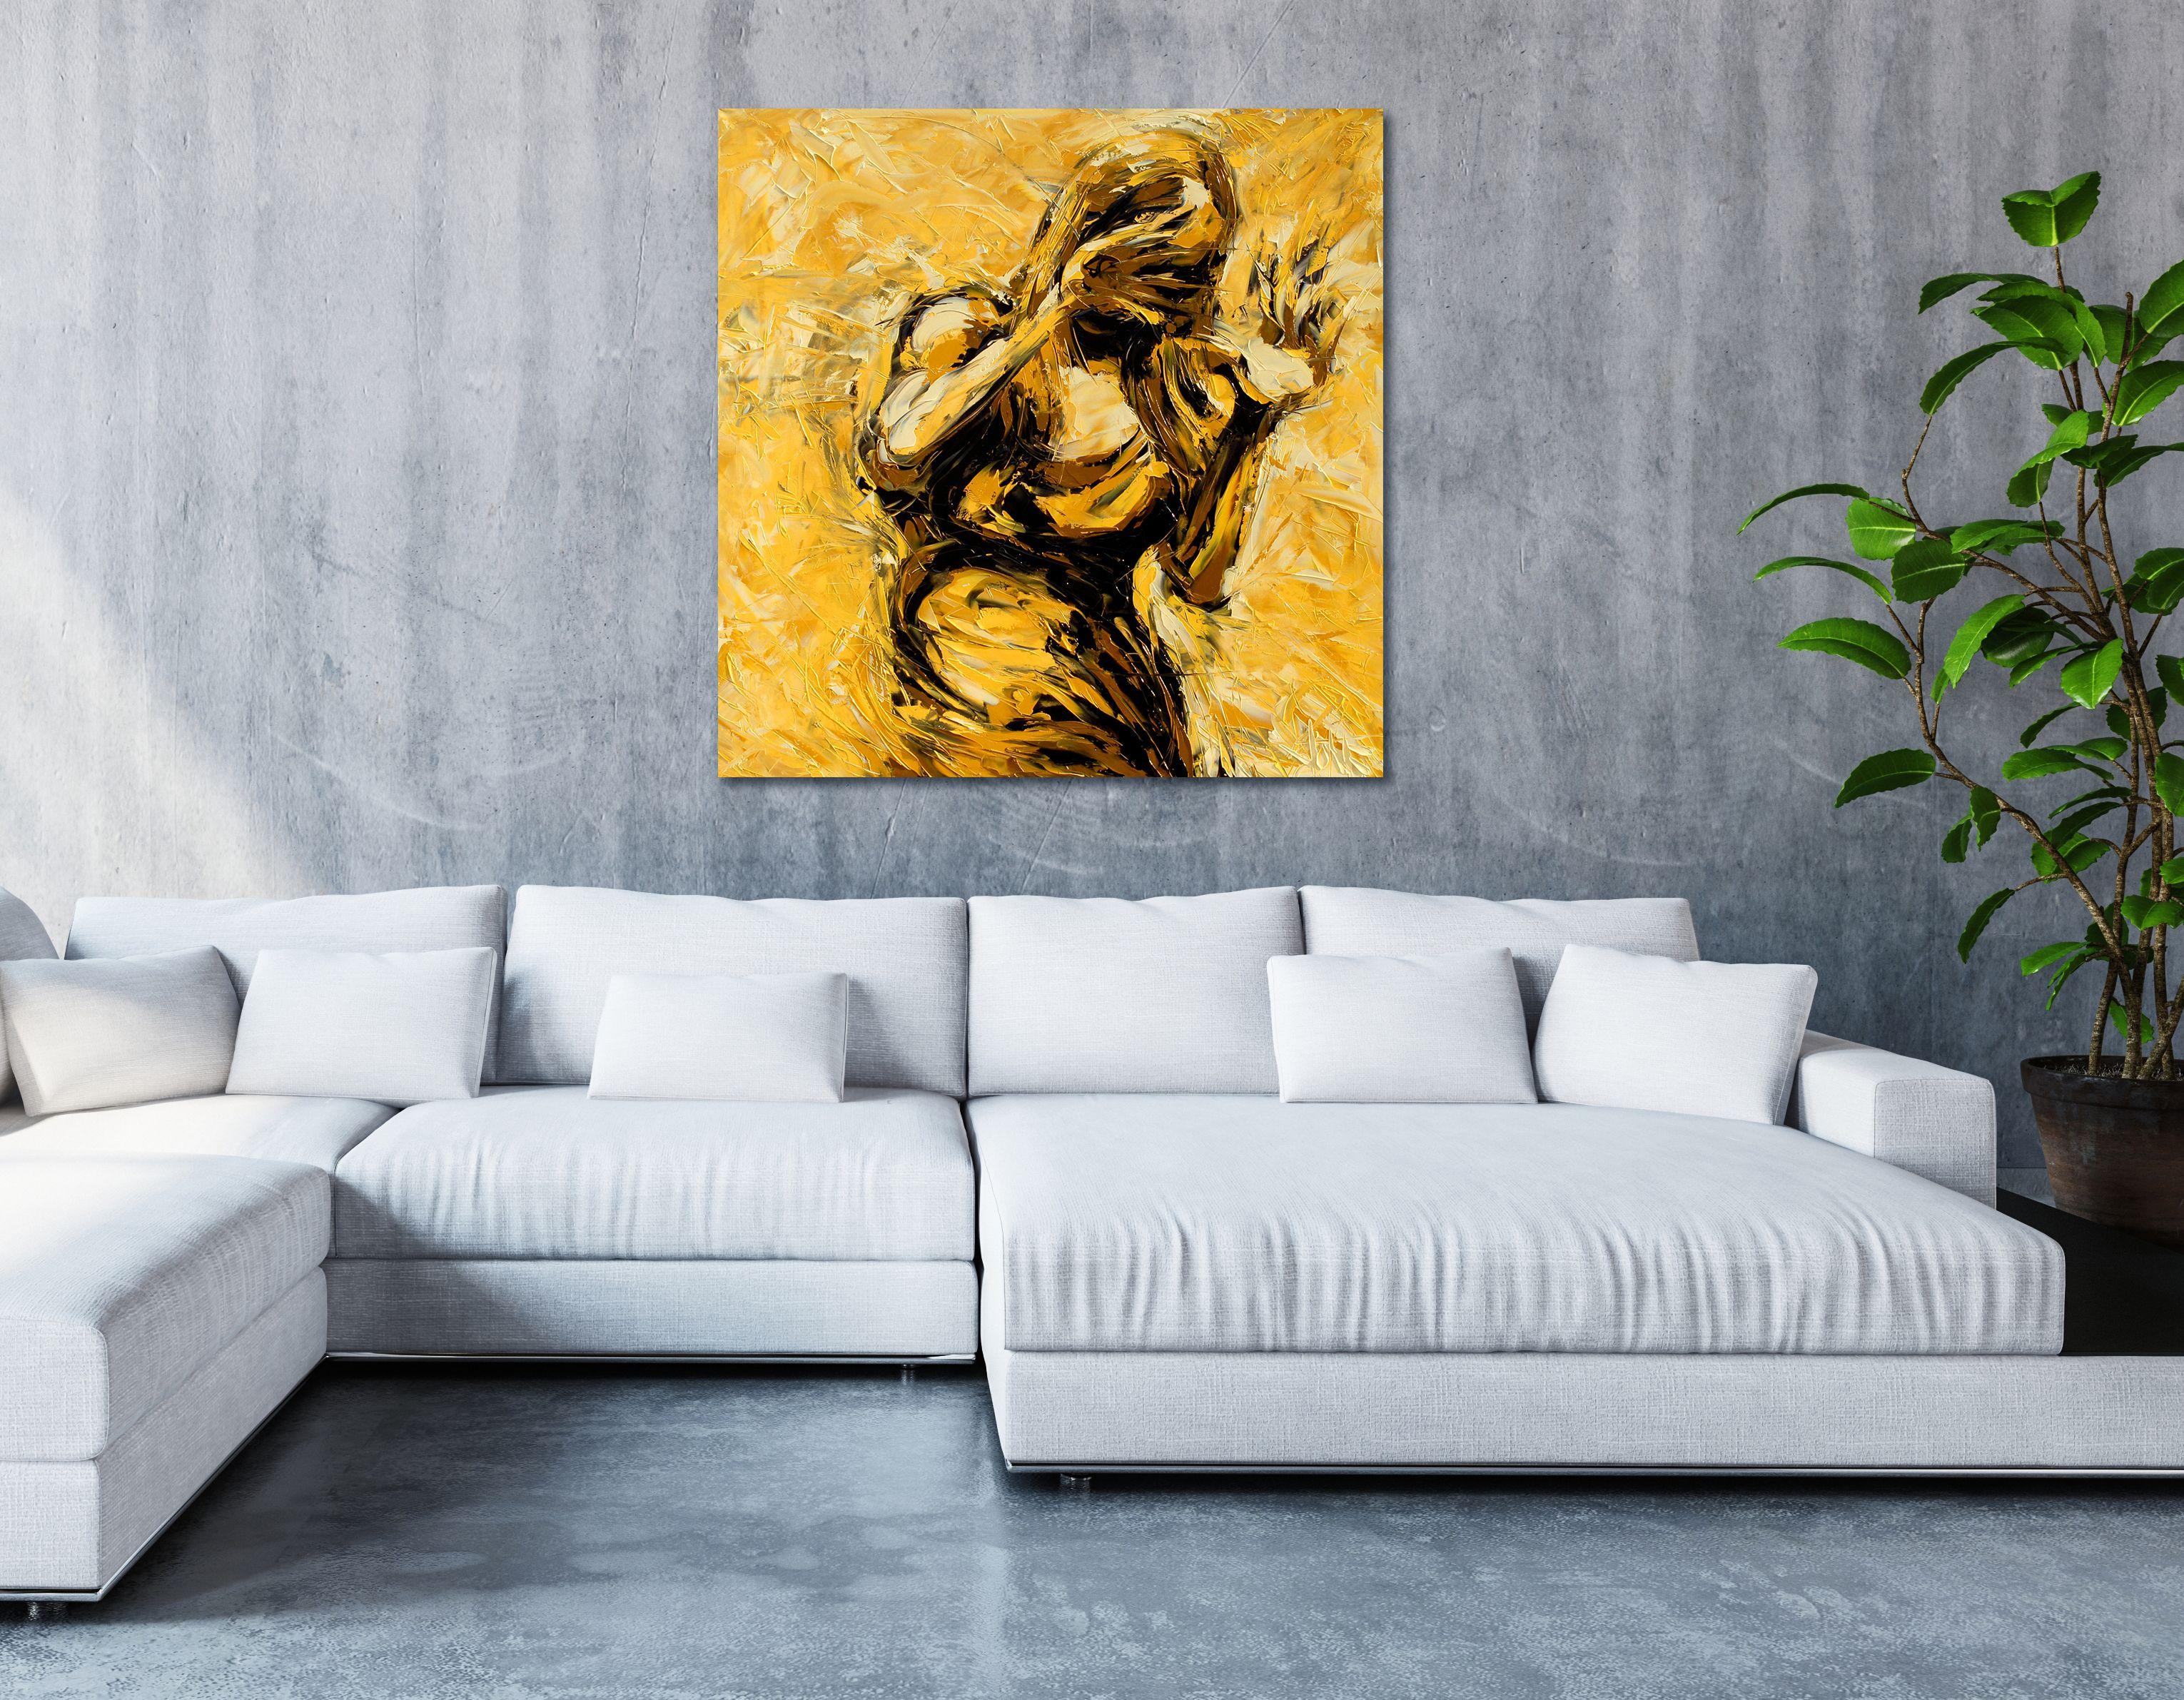 Why do we flinch when someone raises their hand? :: Painting :: Abstract Expressionism :: This piece comes with an official certificate of authenticity signed by the artist :: Ready to Hang: Yes :: Signed: Yes :: Signature Location: bottom right ::